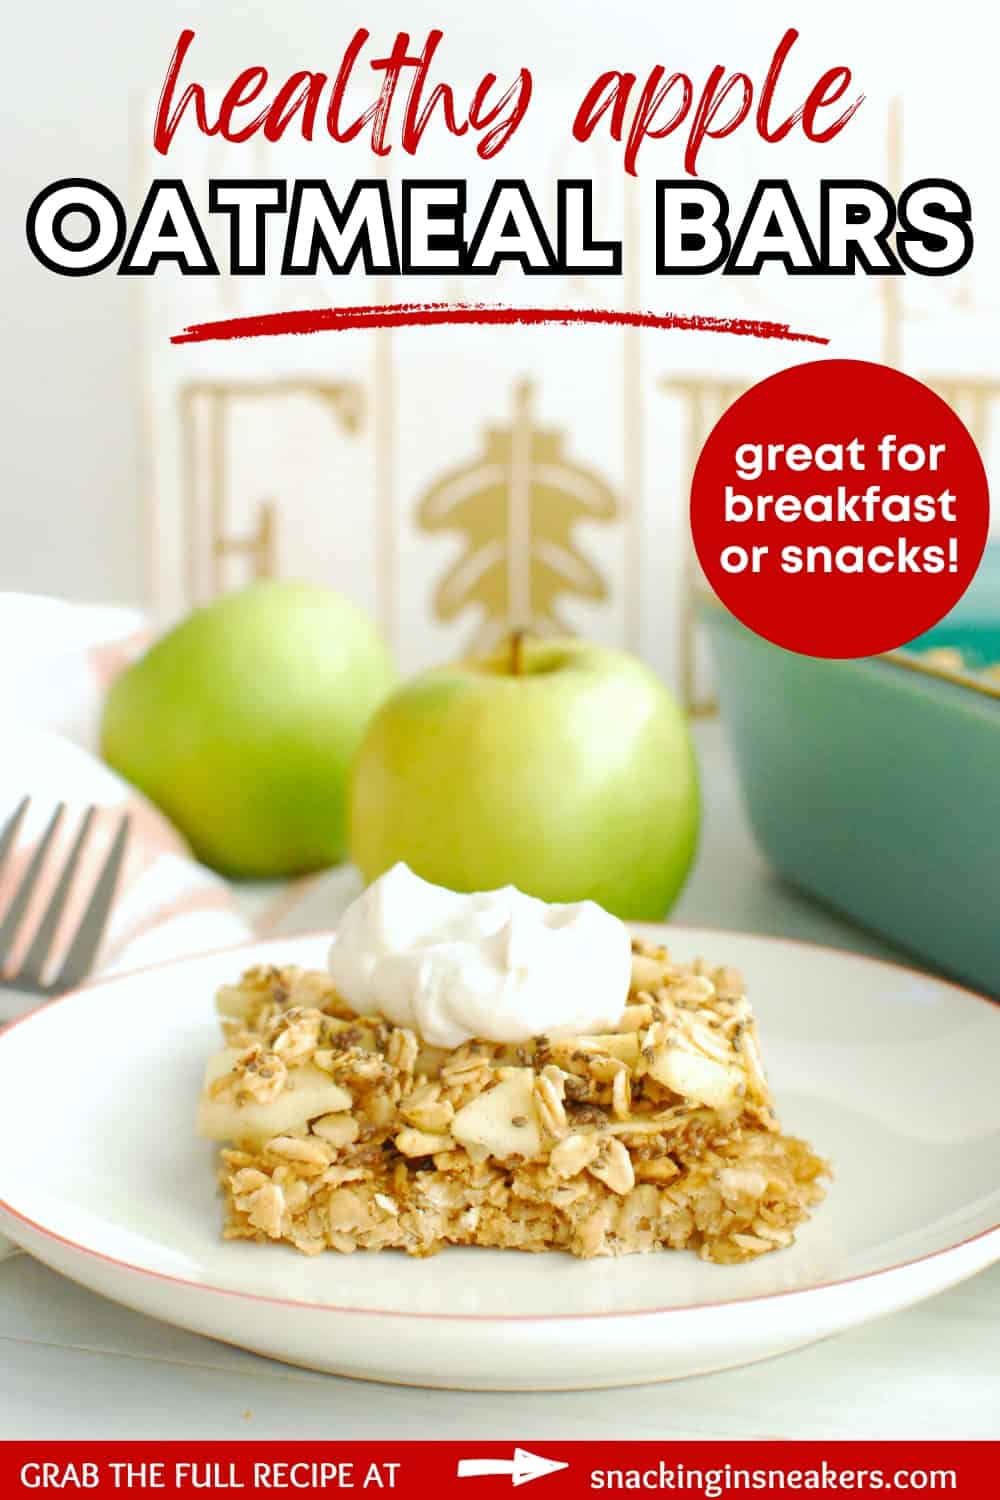 A healthy apple oatmeal bar on a white plate with some apples and a baking dish in the background, with a text overlay with the name of the recipe.